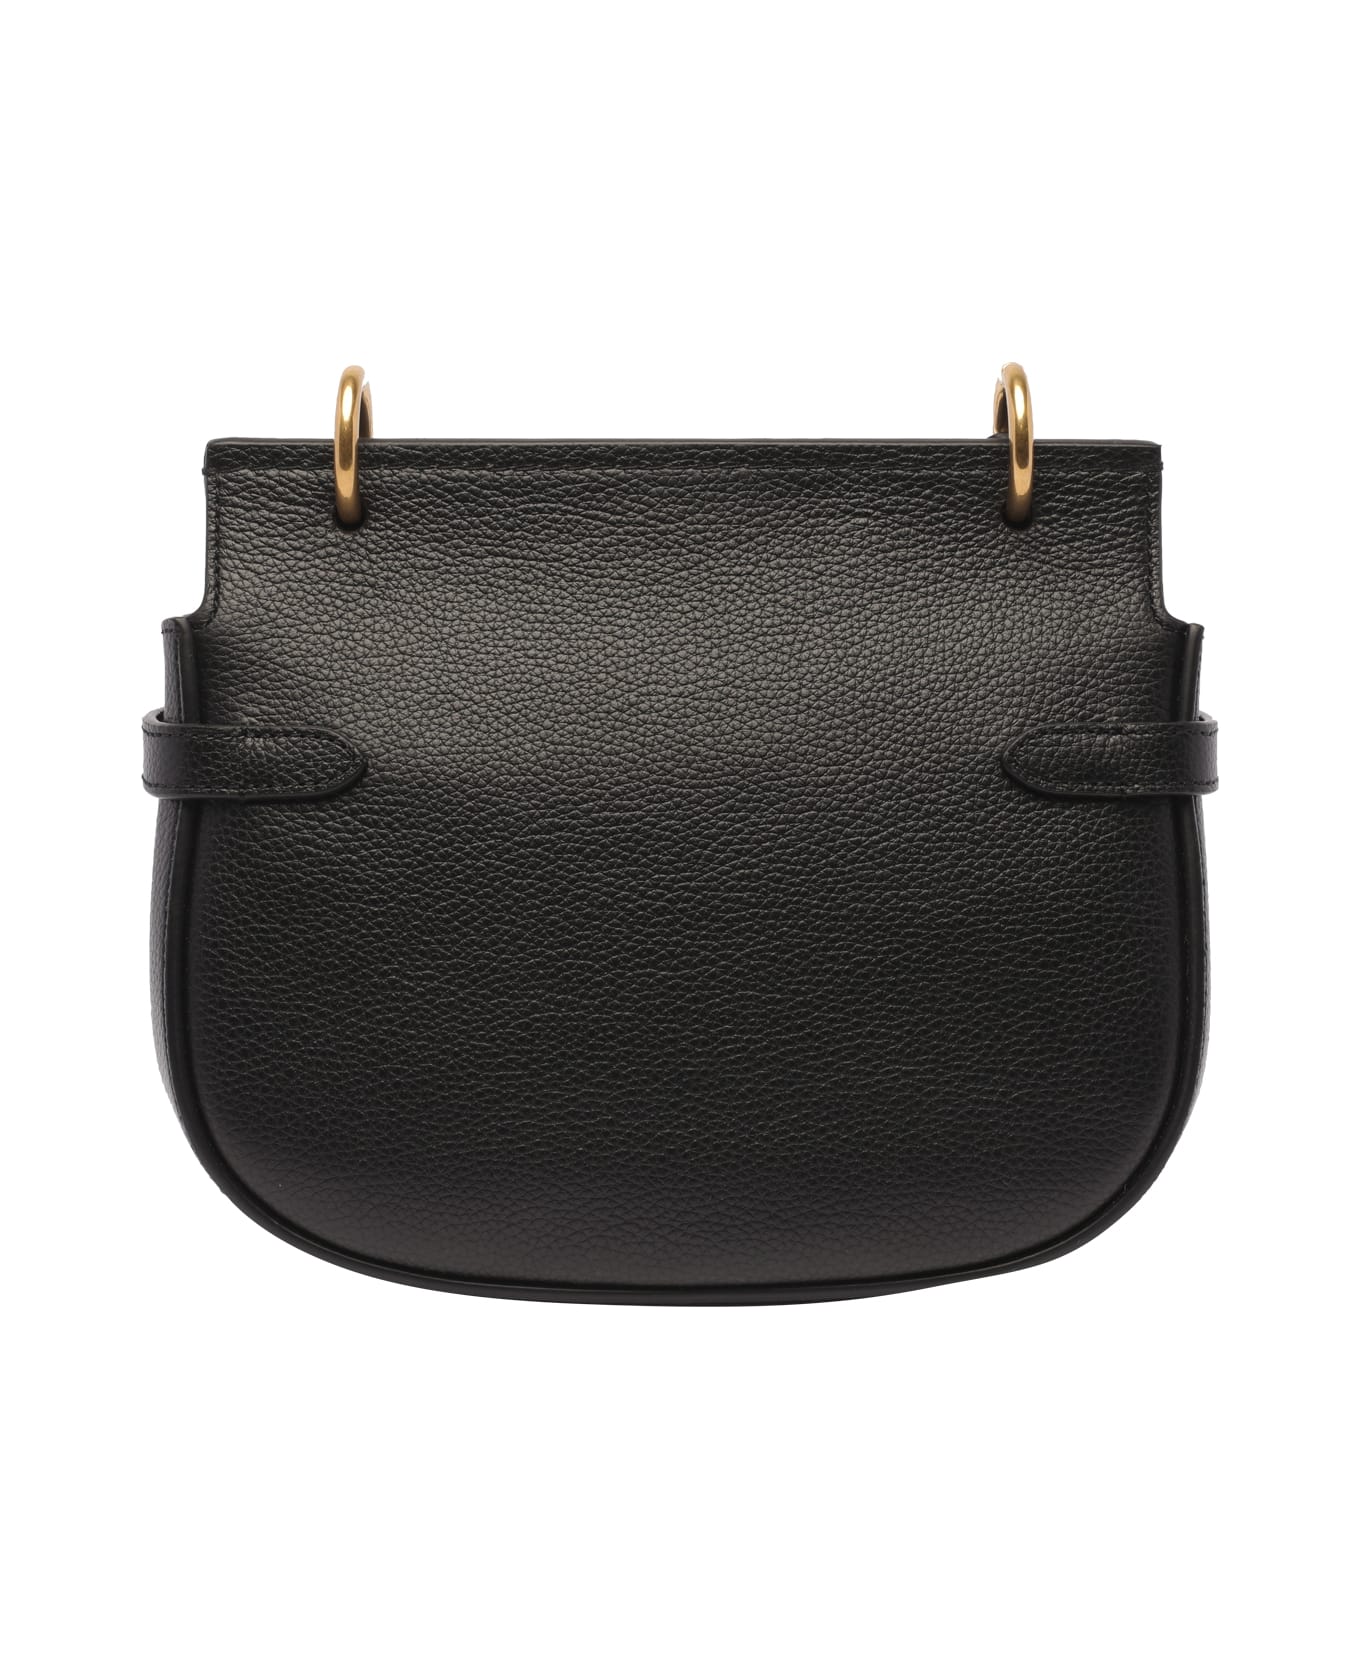 Mulberry Small Amberley Satchel Bag - Black トートバッグ